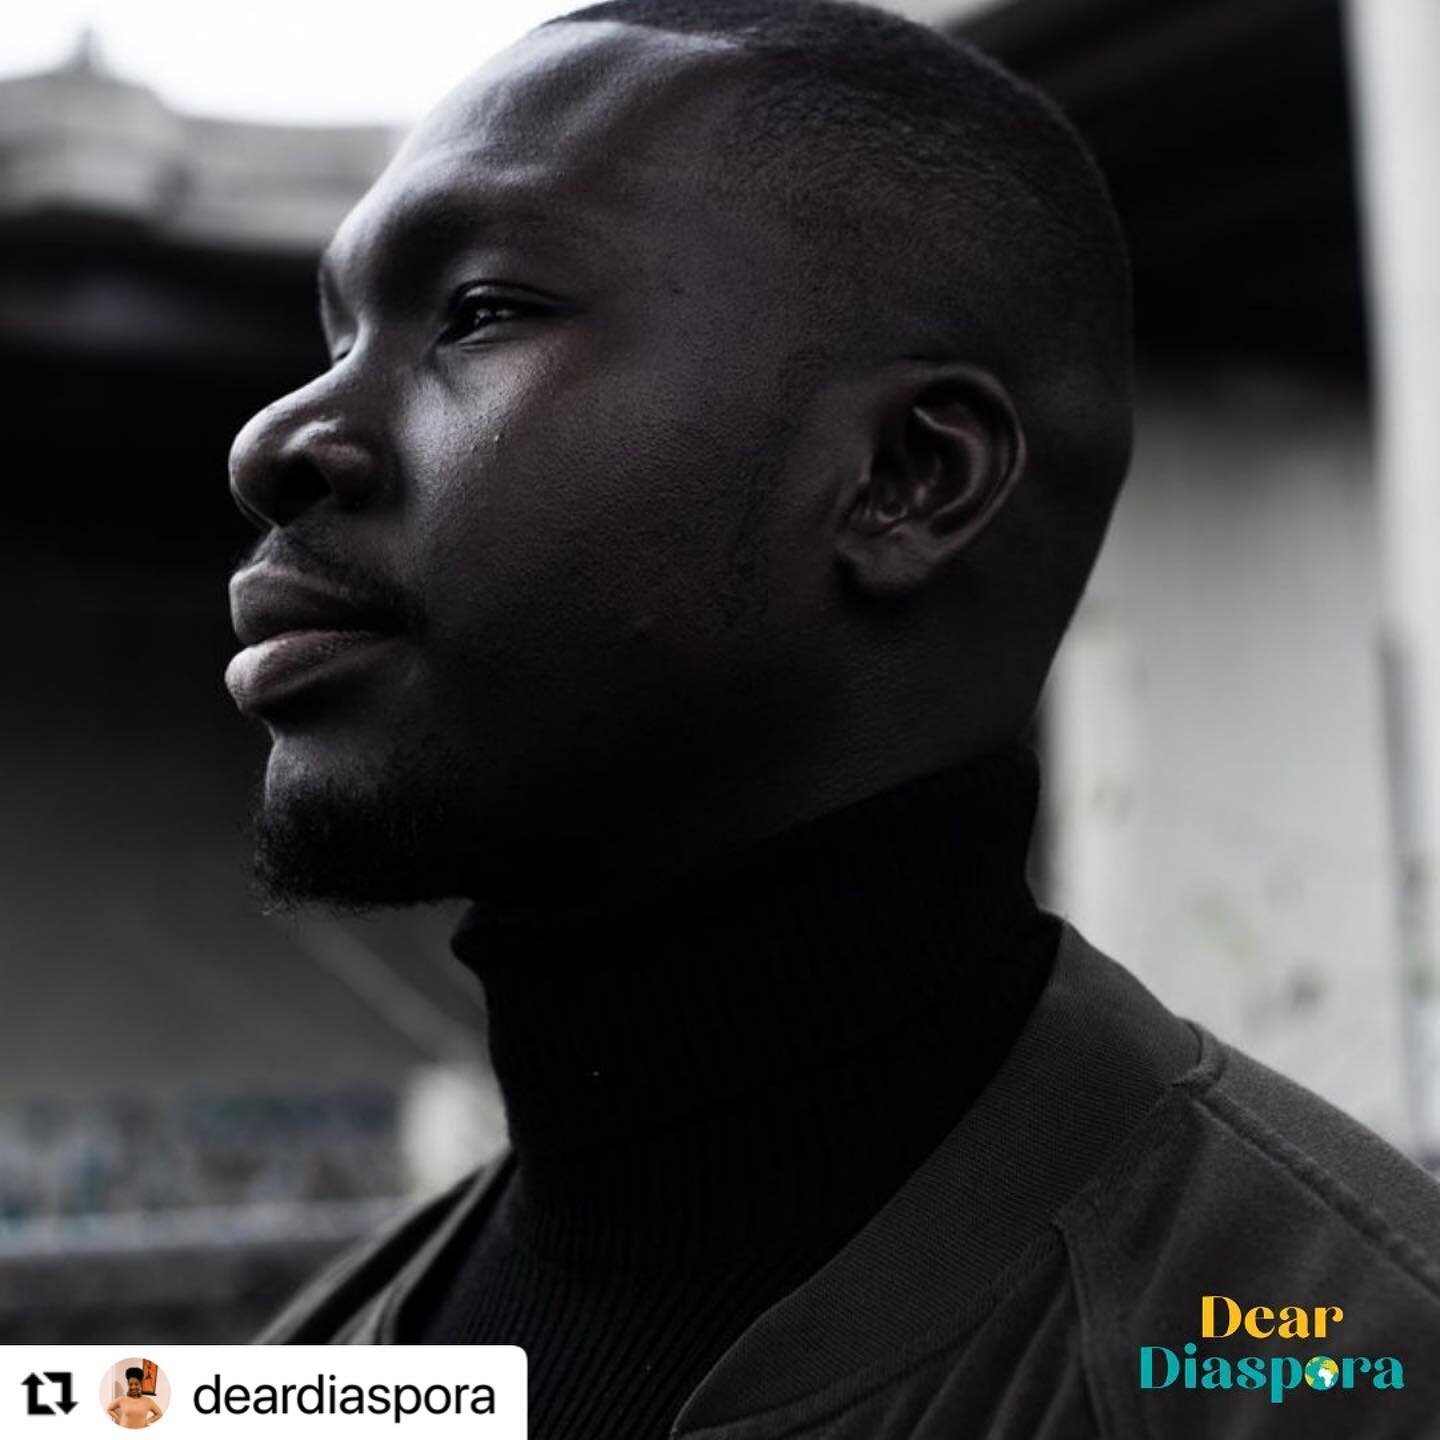 Recently got featured on @deardiaspora . We spoke to her about how we work together on the podcast and our thoughts on the #endsars protests.

Please go to @deardiaspora to listen to the episode